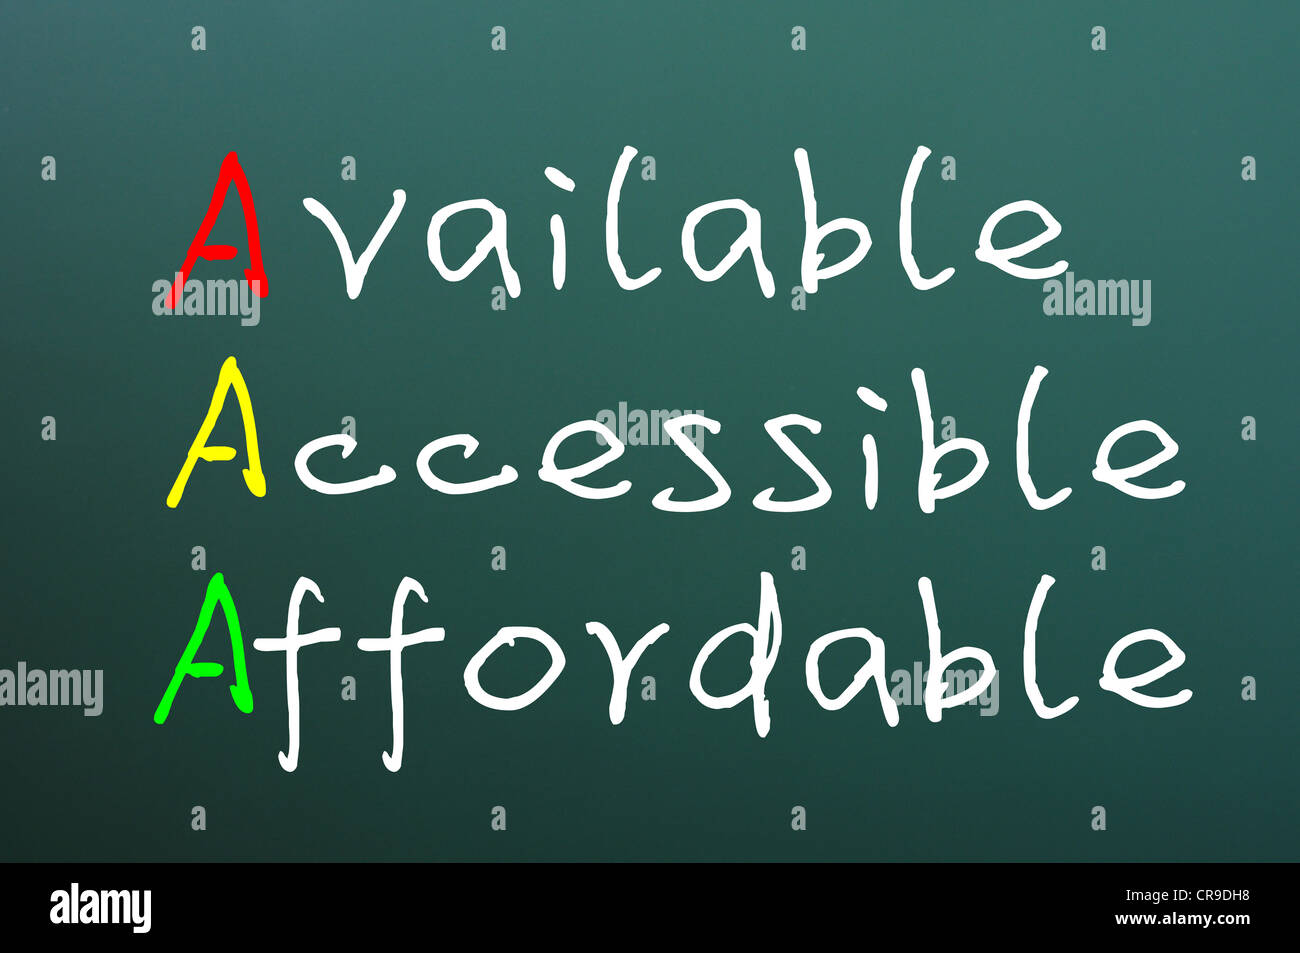 blank school learning wood conceptual aaa abbreviation accessible acronym affordable available background billboard black Stock Photo